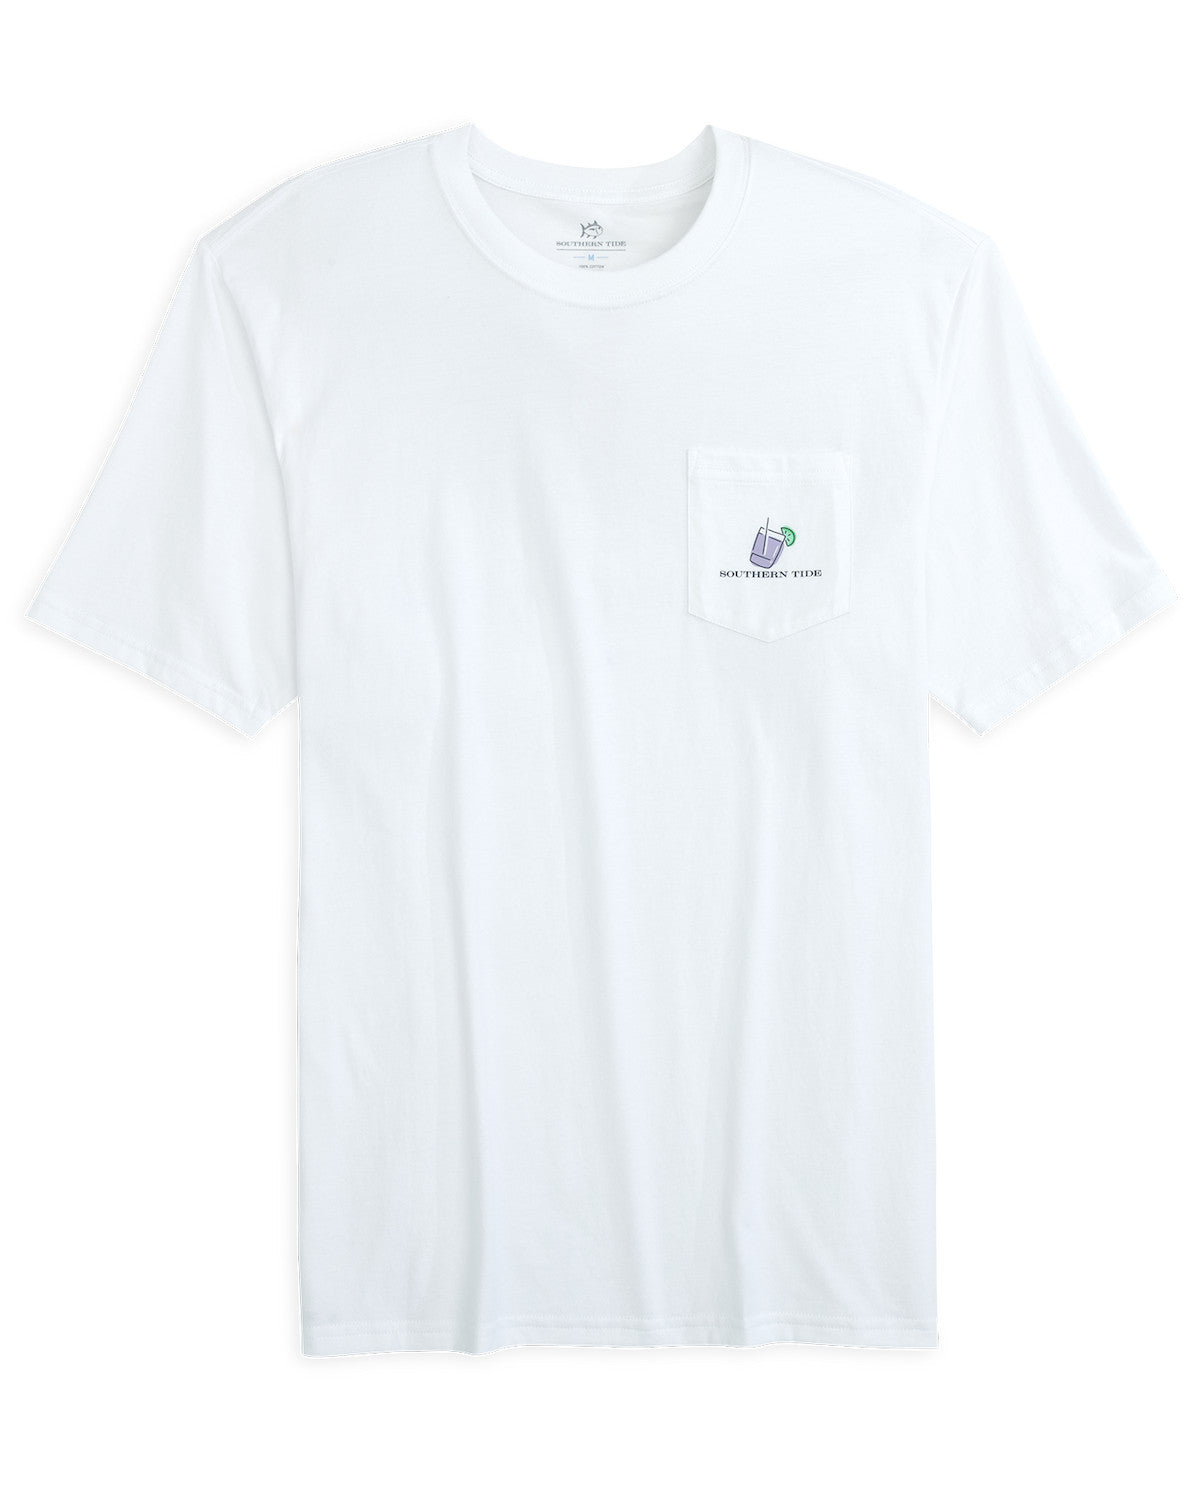 Southern Tide - Dazed and Transfused Tee (Classic White)